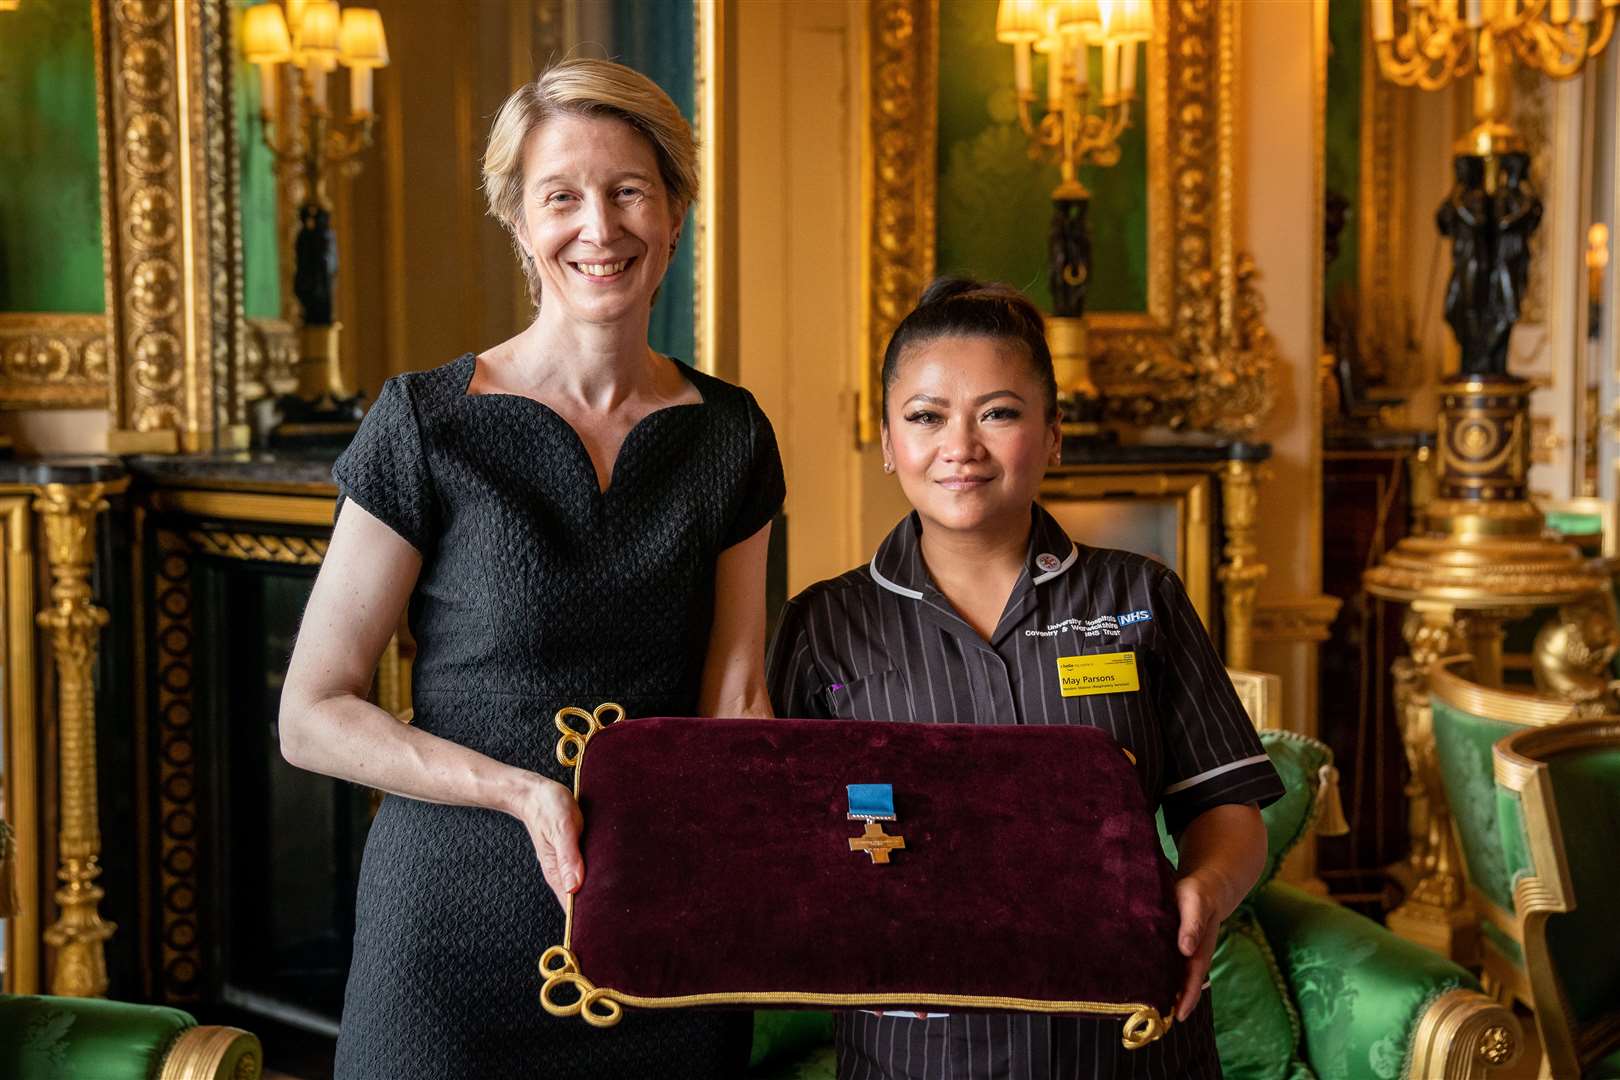 Amanda Pritchard, chief executive of NHS England, and May Parsons received the George Cross at Windsor Castle (Aaron Chown/PA)